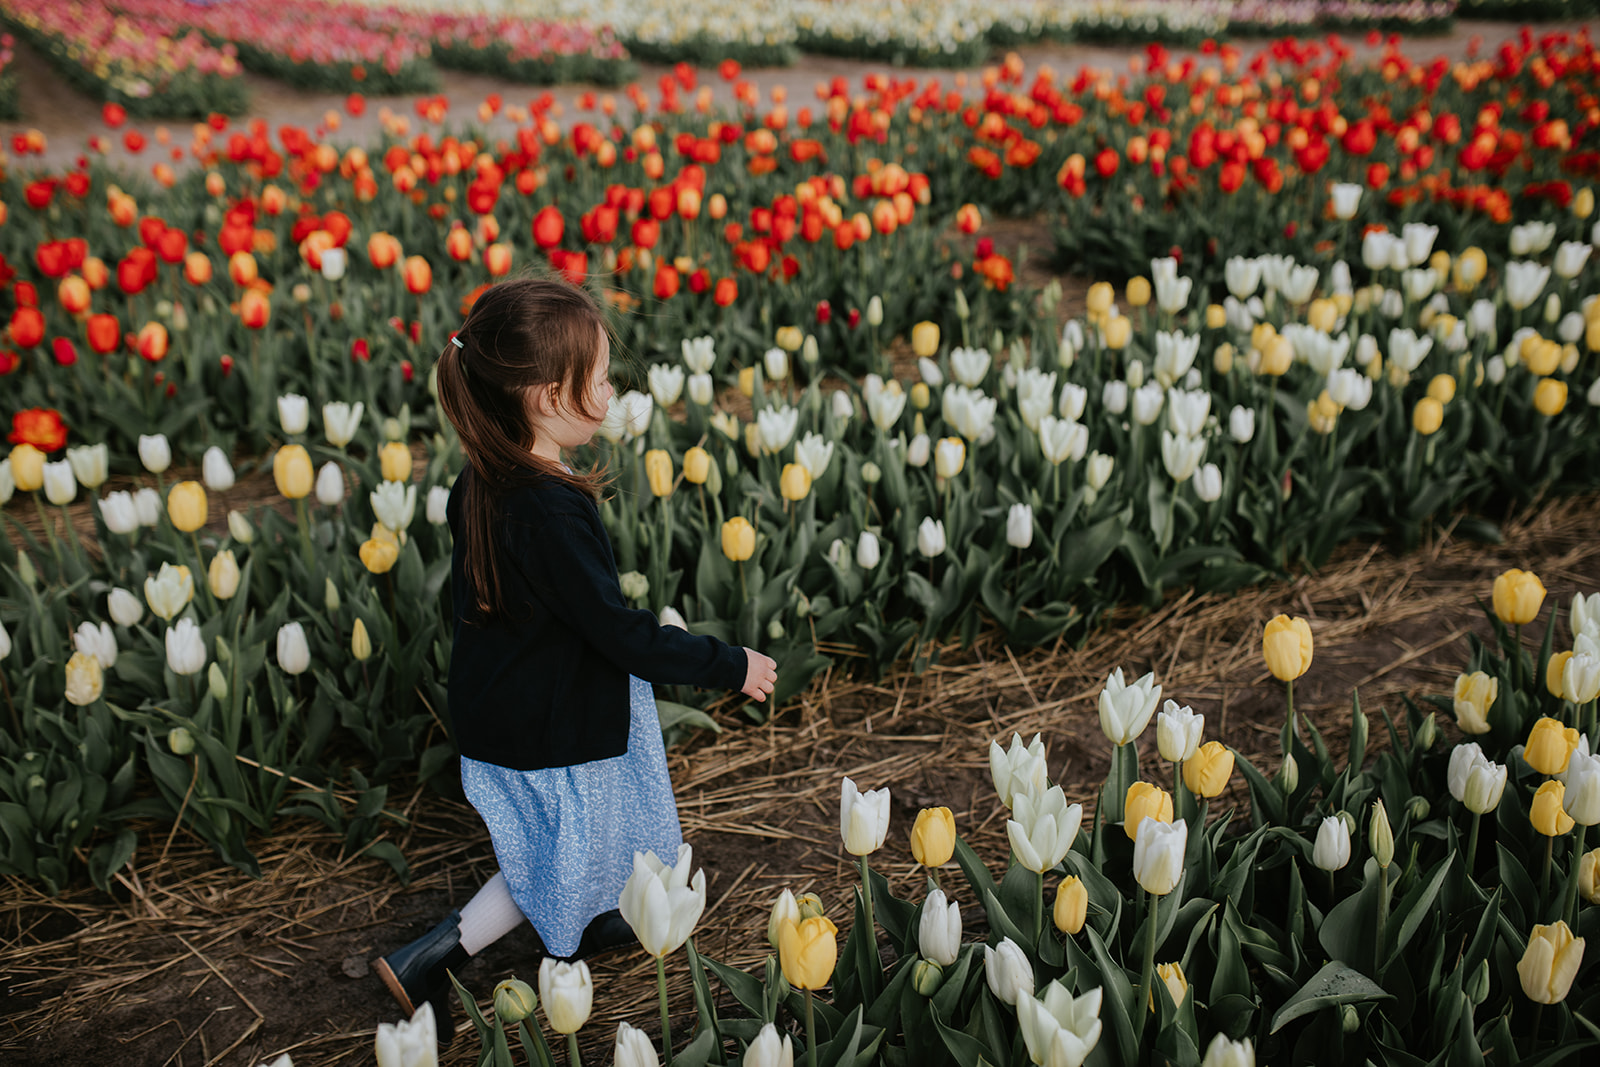 Family photoshoot at the tulip fields 